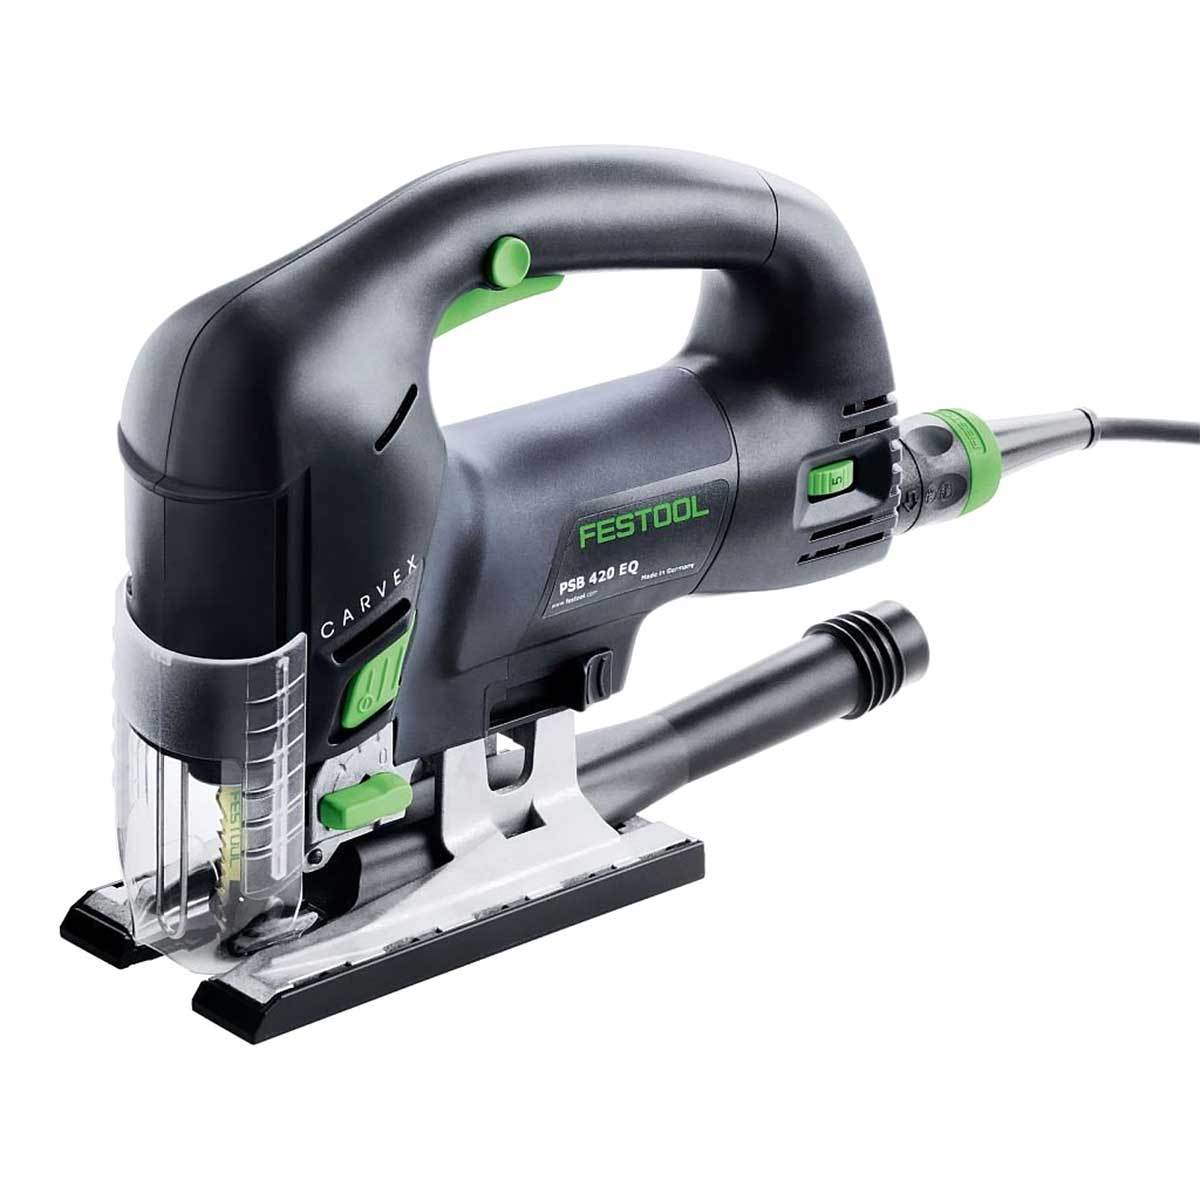 The Festool Carvex D-Handle Jigsaw has a sliding clear chipguard for blade visibility and to contain chips for extraction